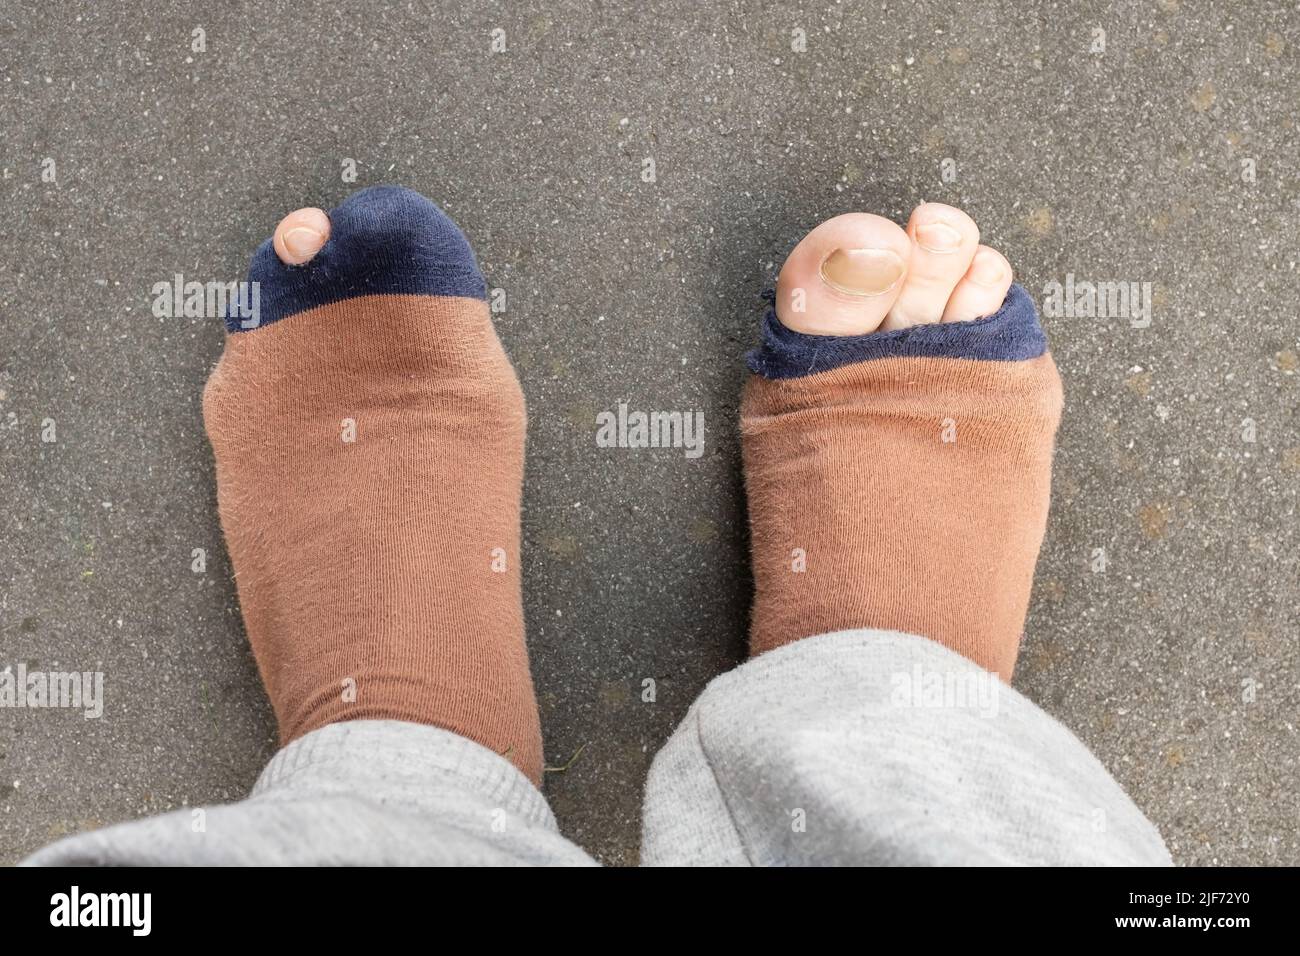 Male legs with protruding toes in holey worn socks, on a gray